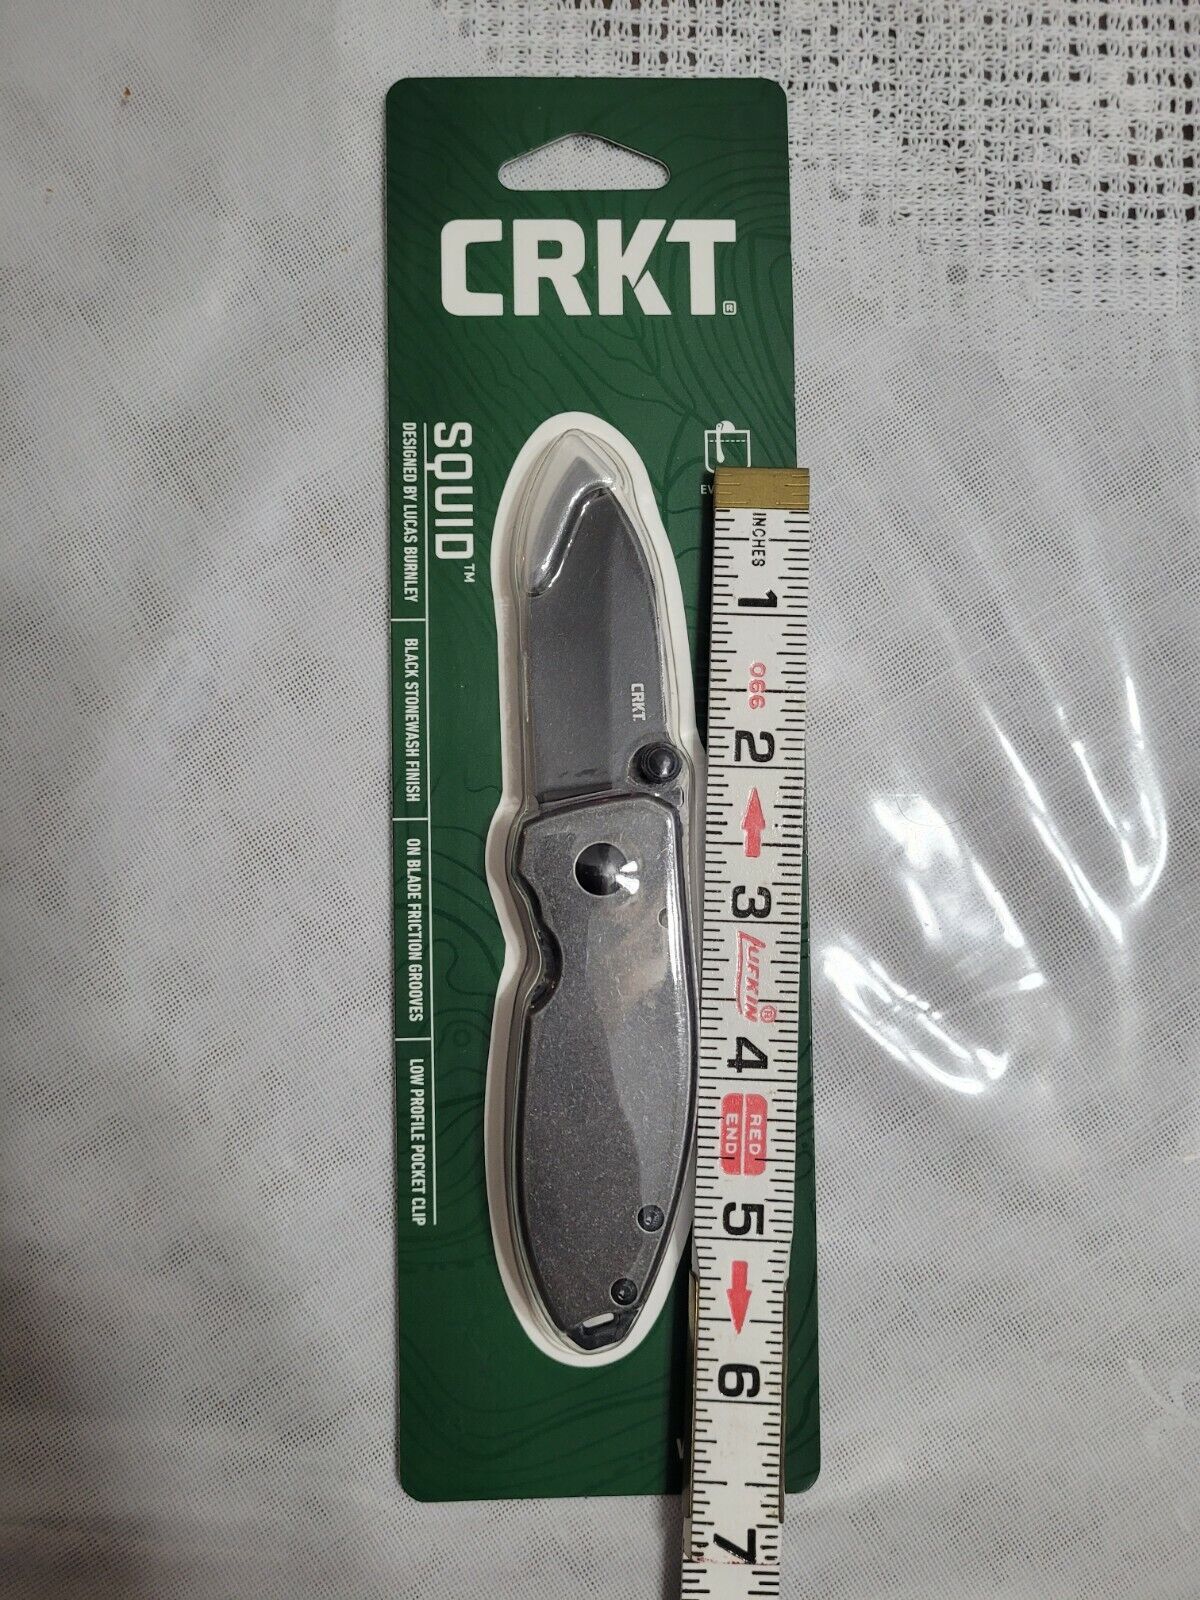 CRKT - Squid KNIFE  /Stone-wash Finish / frame lock low profile clip .. /